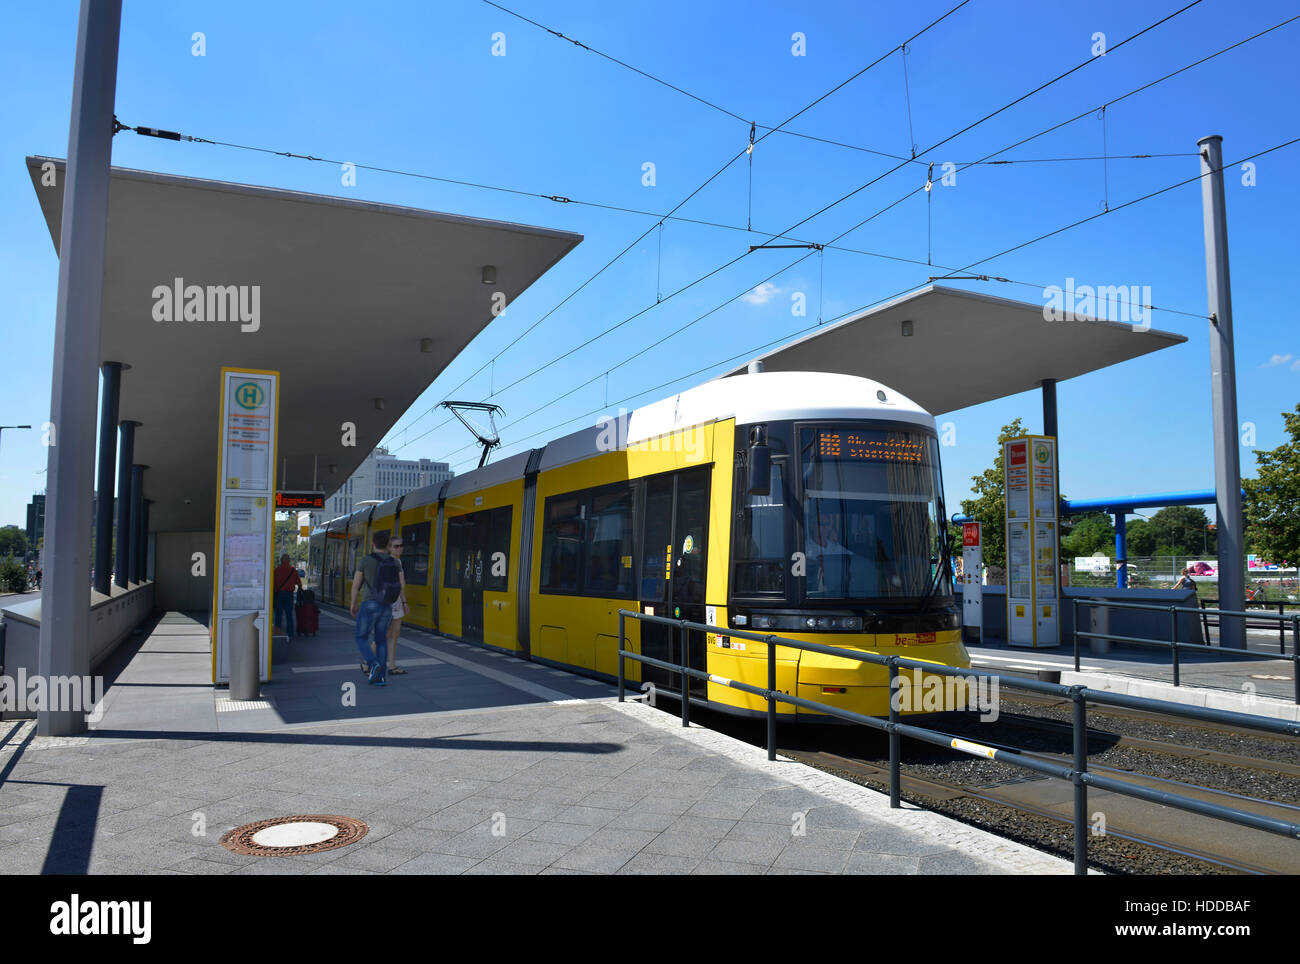 Page 3 - Strassenbahn Tram High Resolution Stock Photography and Images -  Alamy